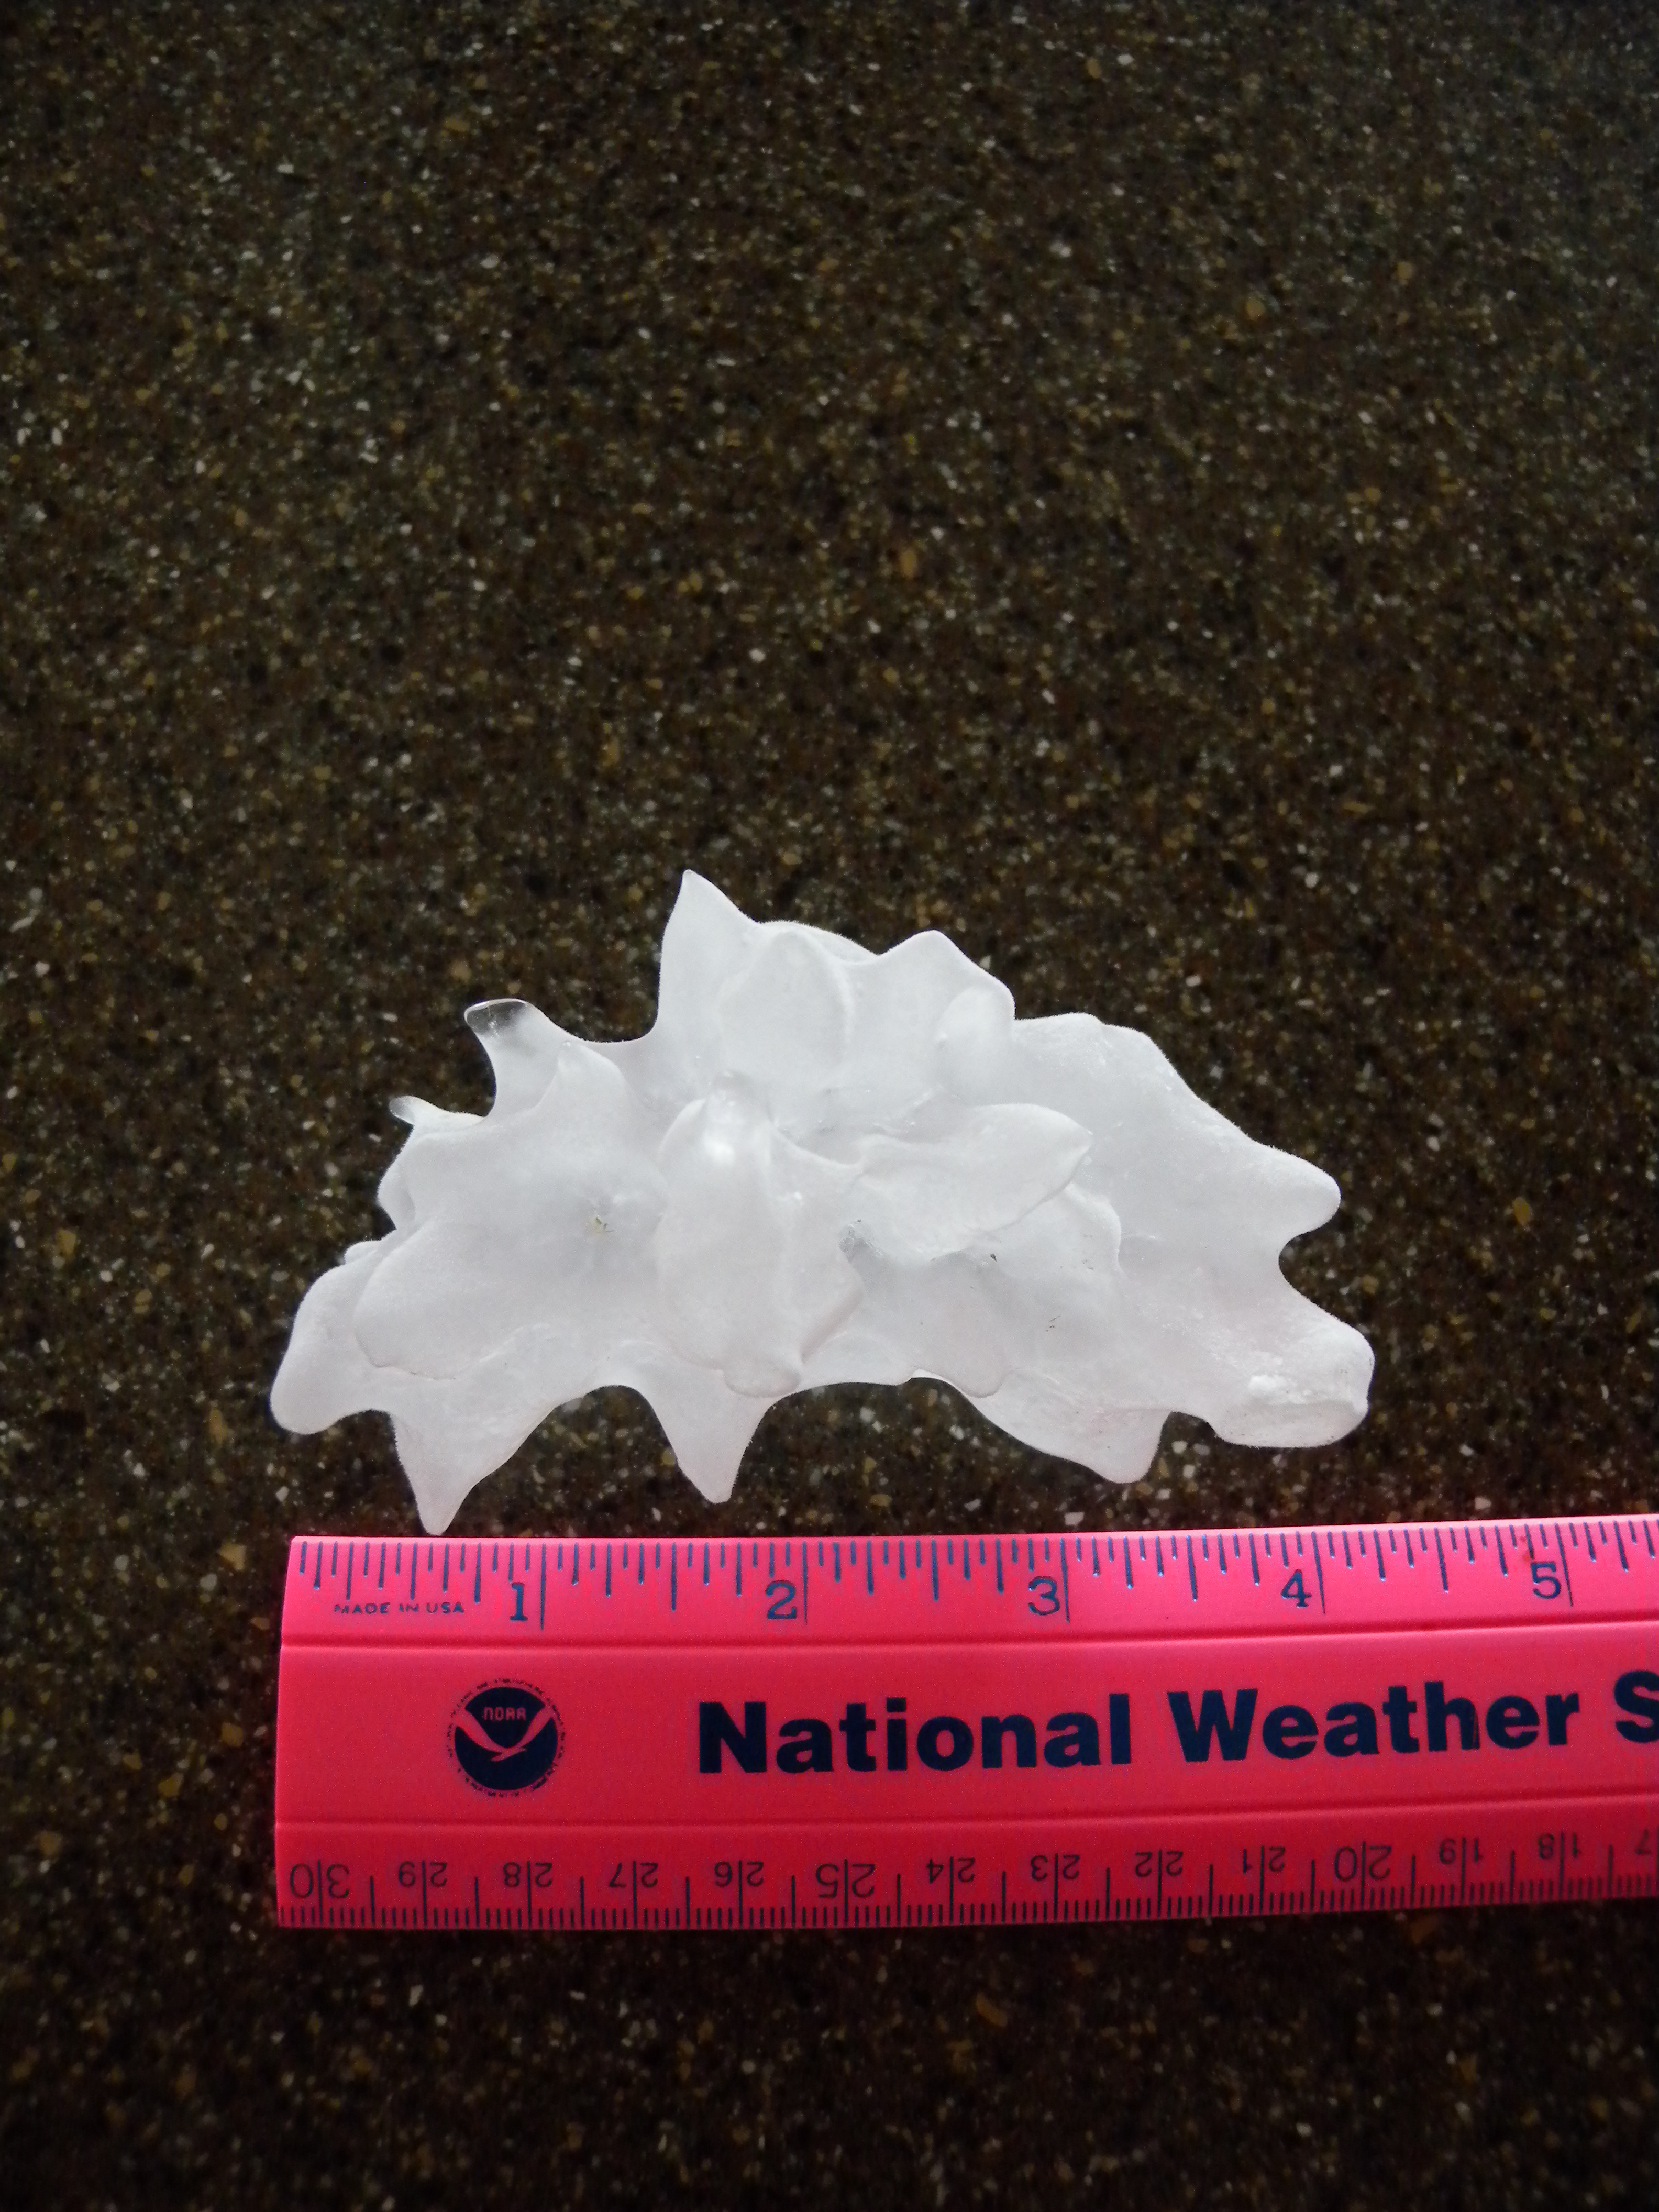 Picture of the record setting hail stone from March 9, 2012.